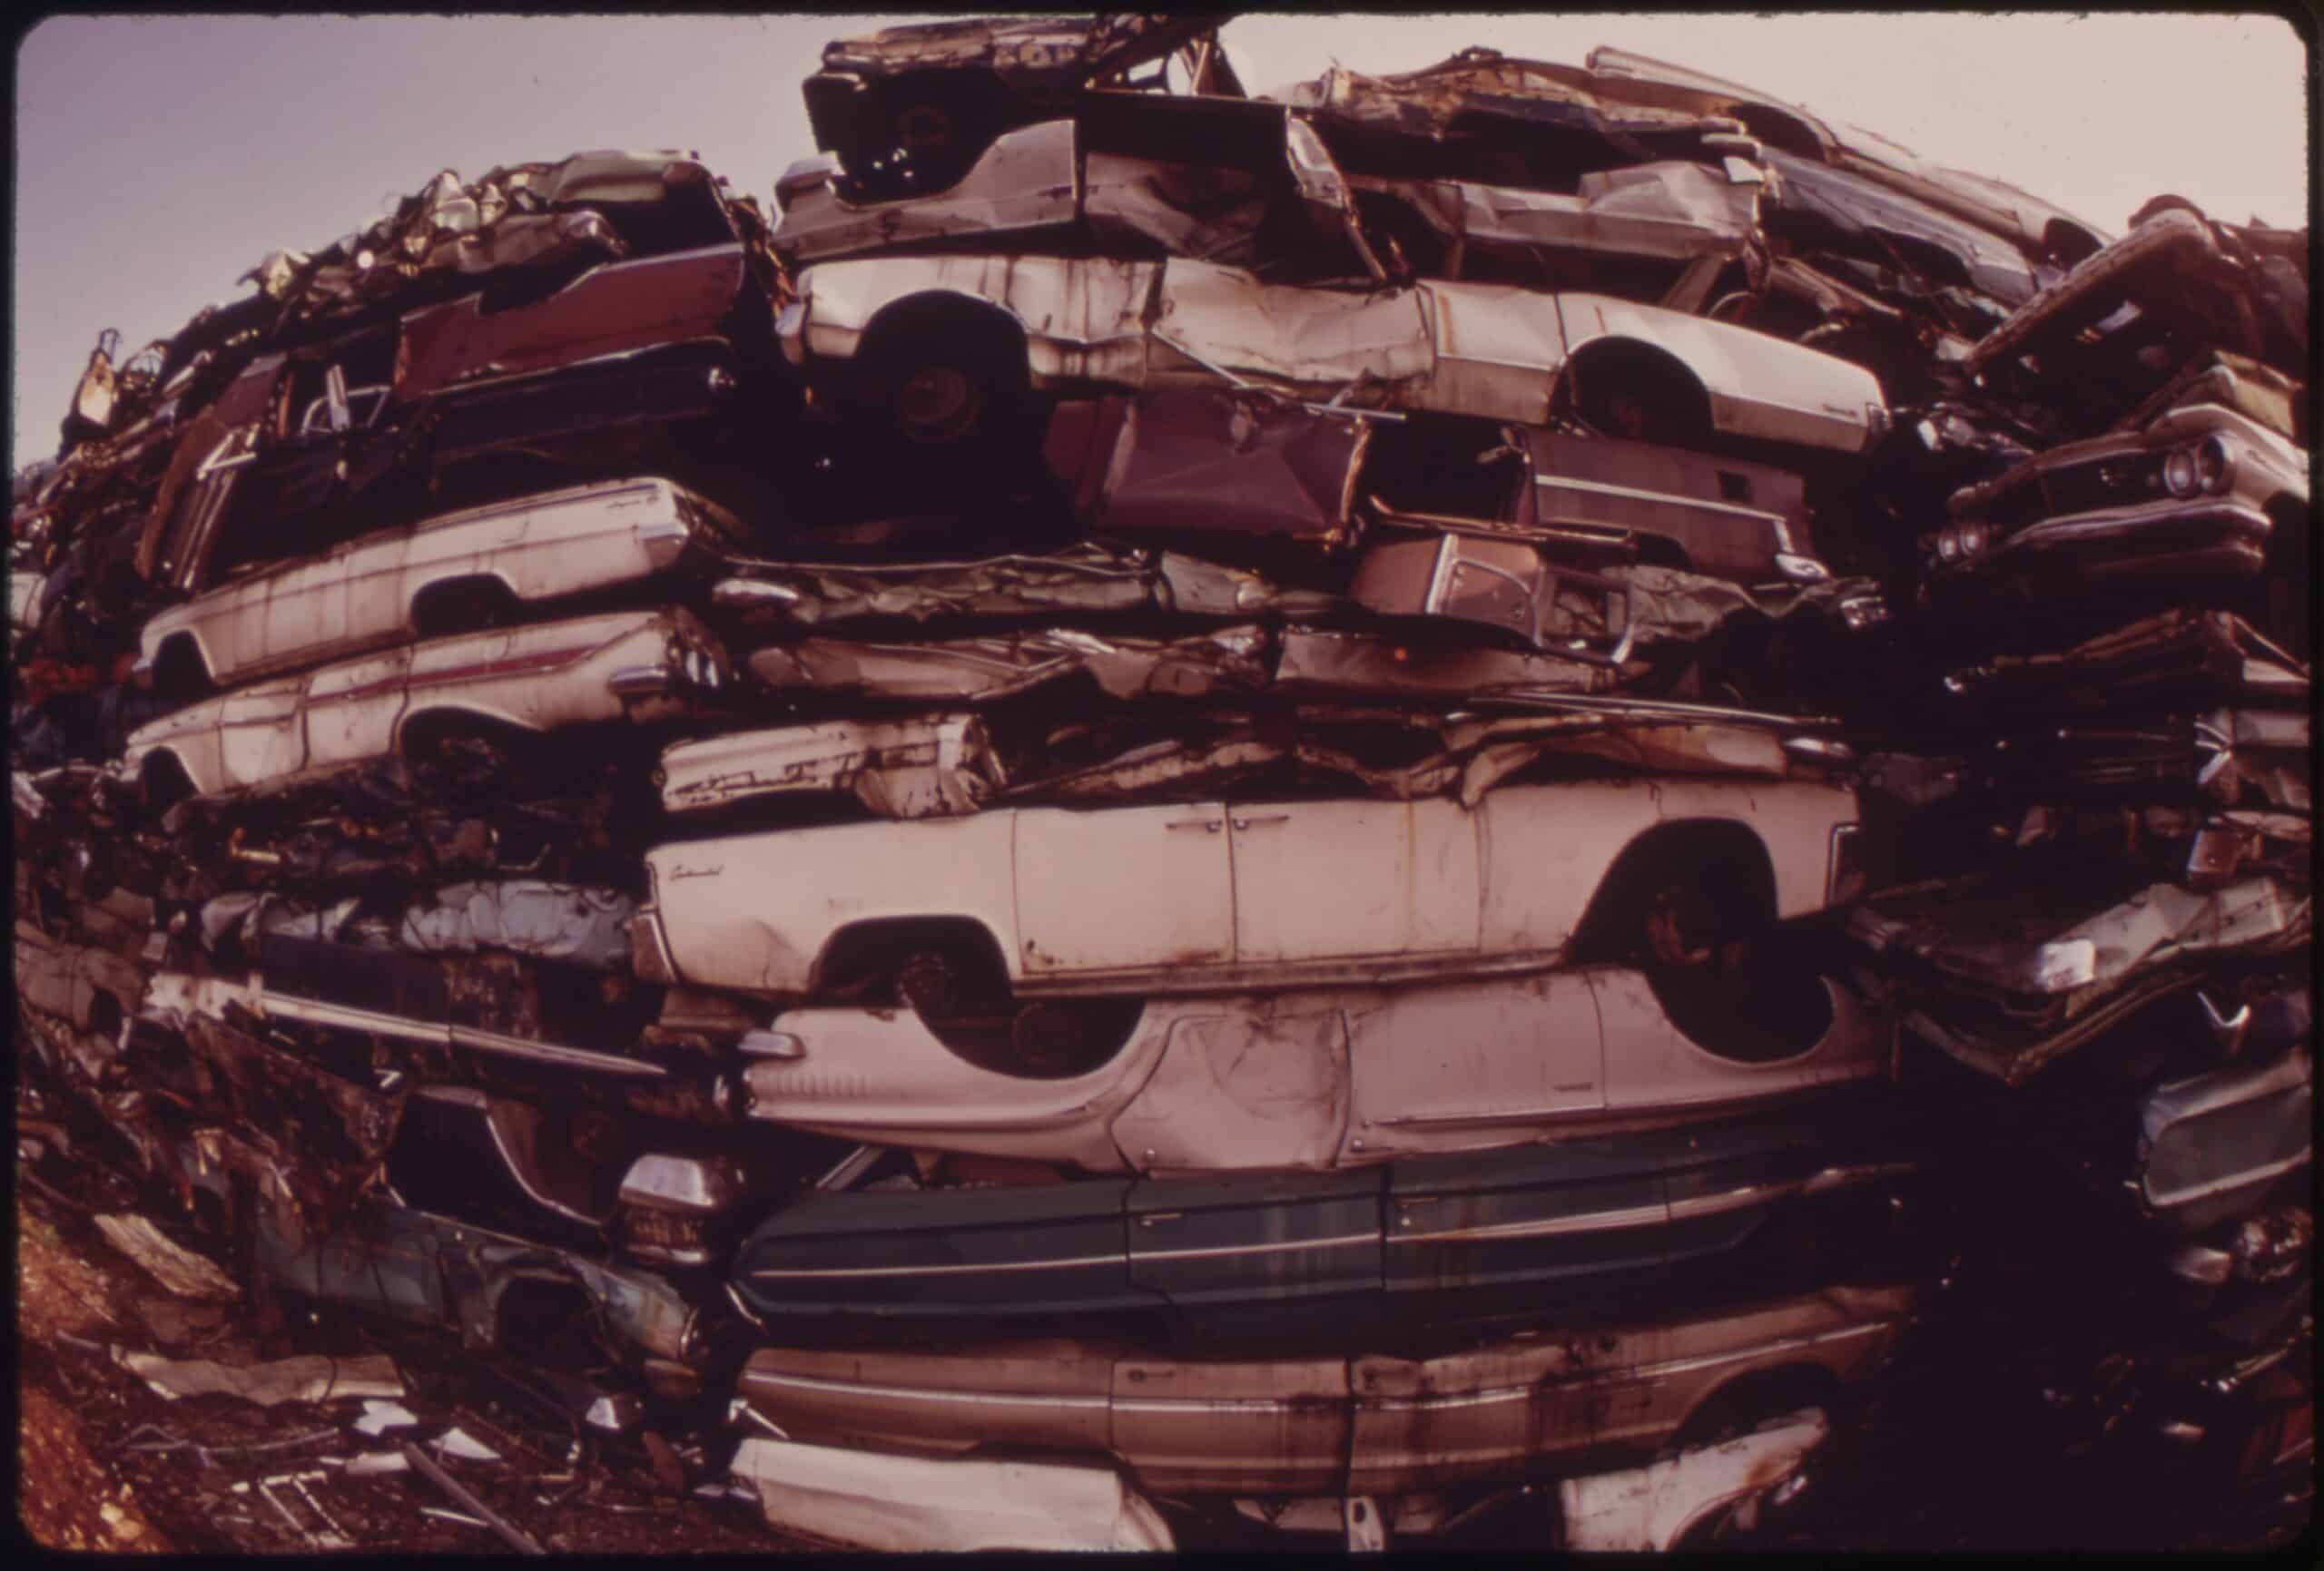 Stacked cars in city junkyard